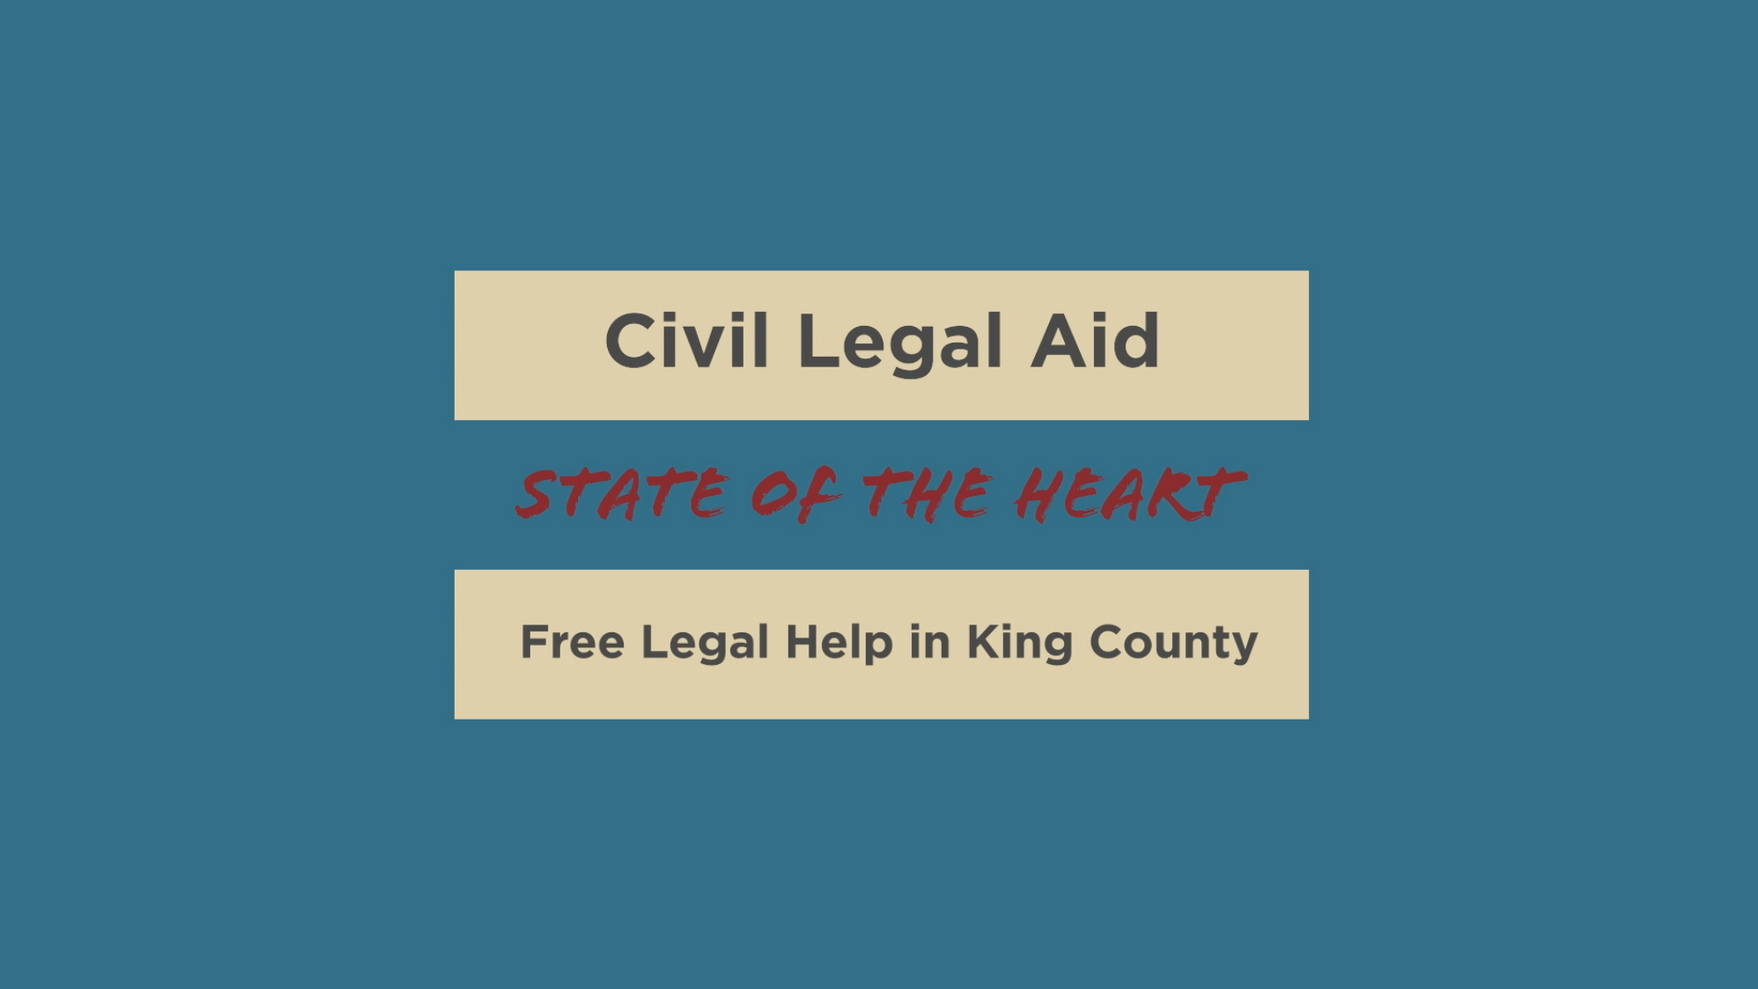 About Our Project - Civil Legal Aid